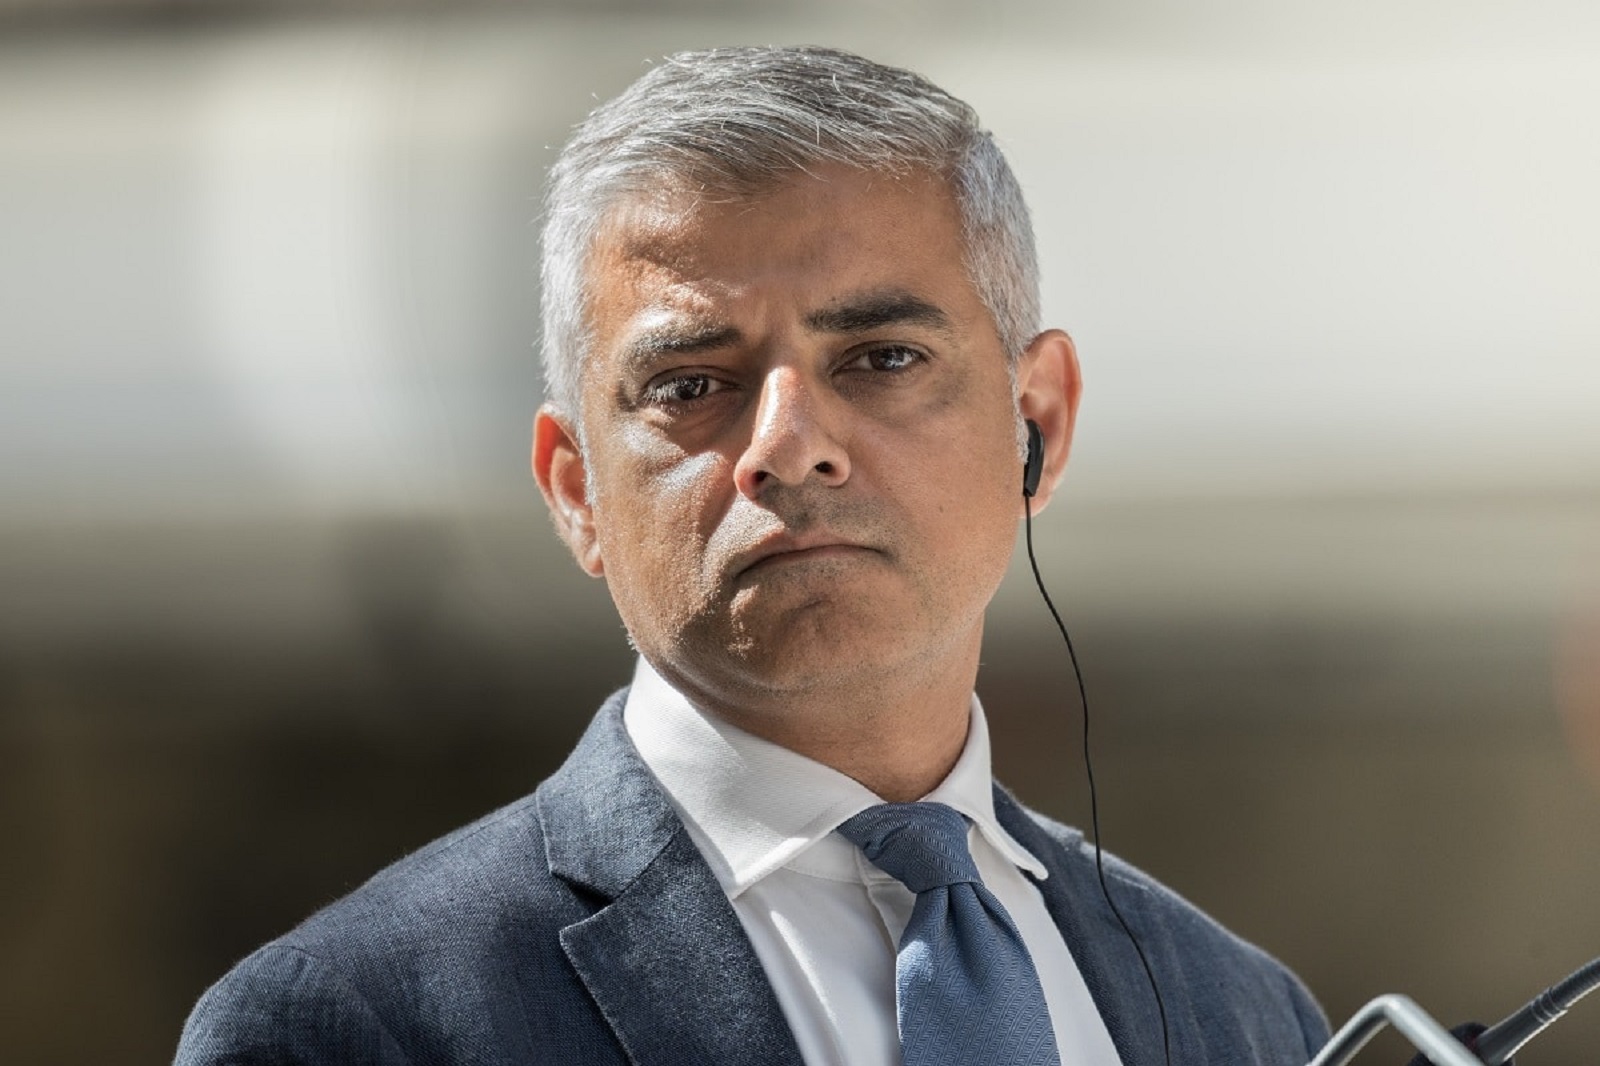 Image Credit: Shutterstock / Frederic Legrand – COMEO <p><span>Hall accused Khan of not funding the parts of the railway that need refurbishment, arguing that “the Central Line is in a terrible state,” while Sadiq Khan focused “on his own PR.”</span></p>